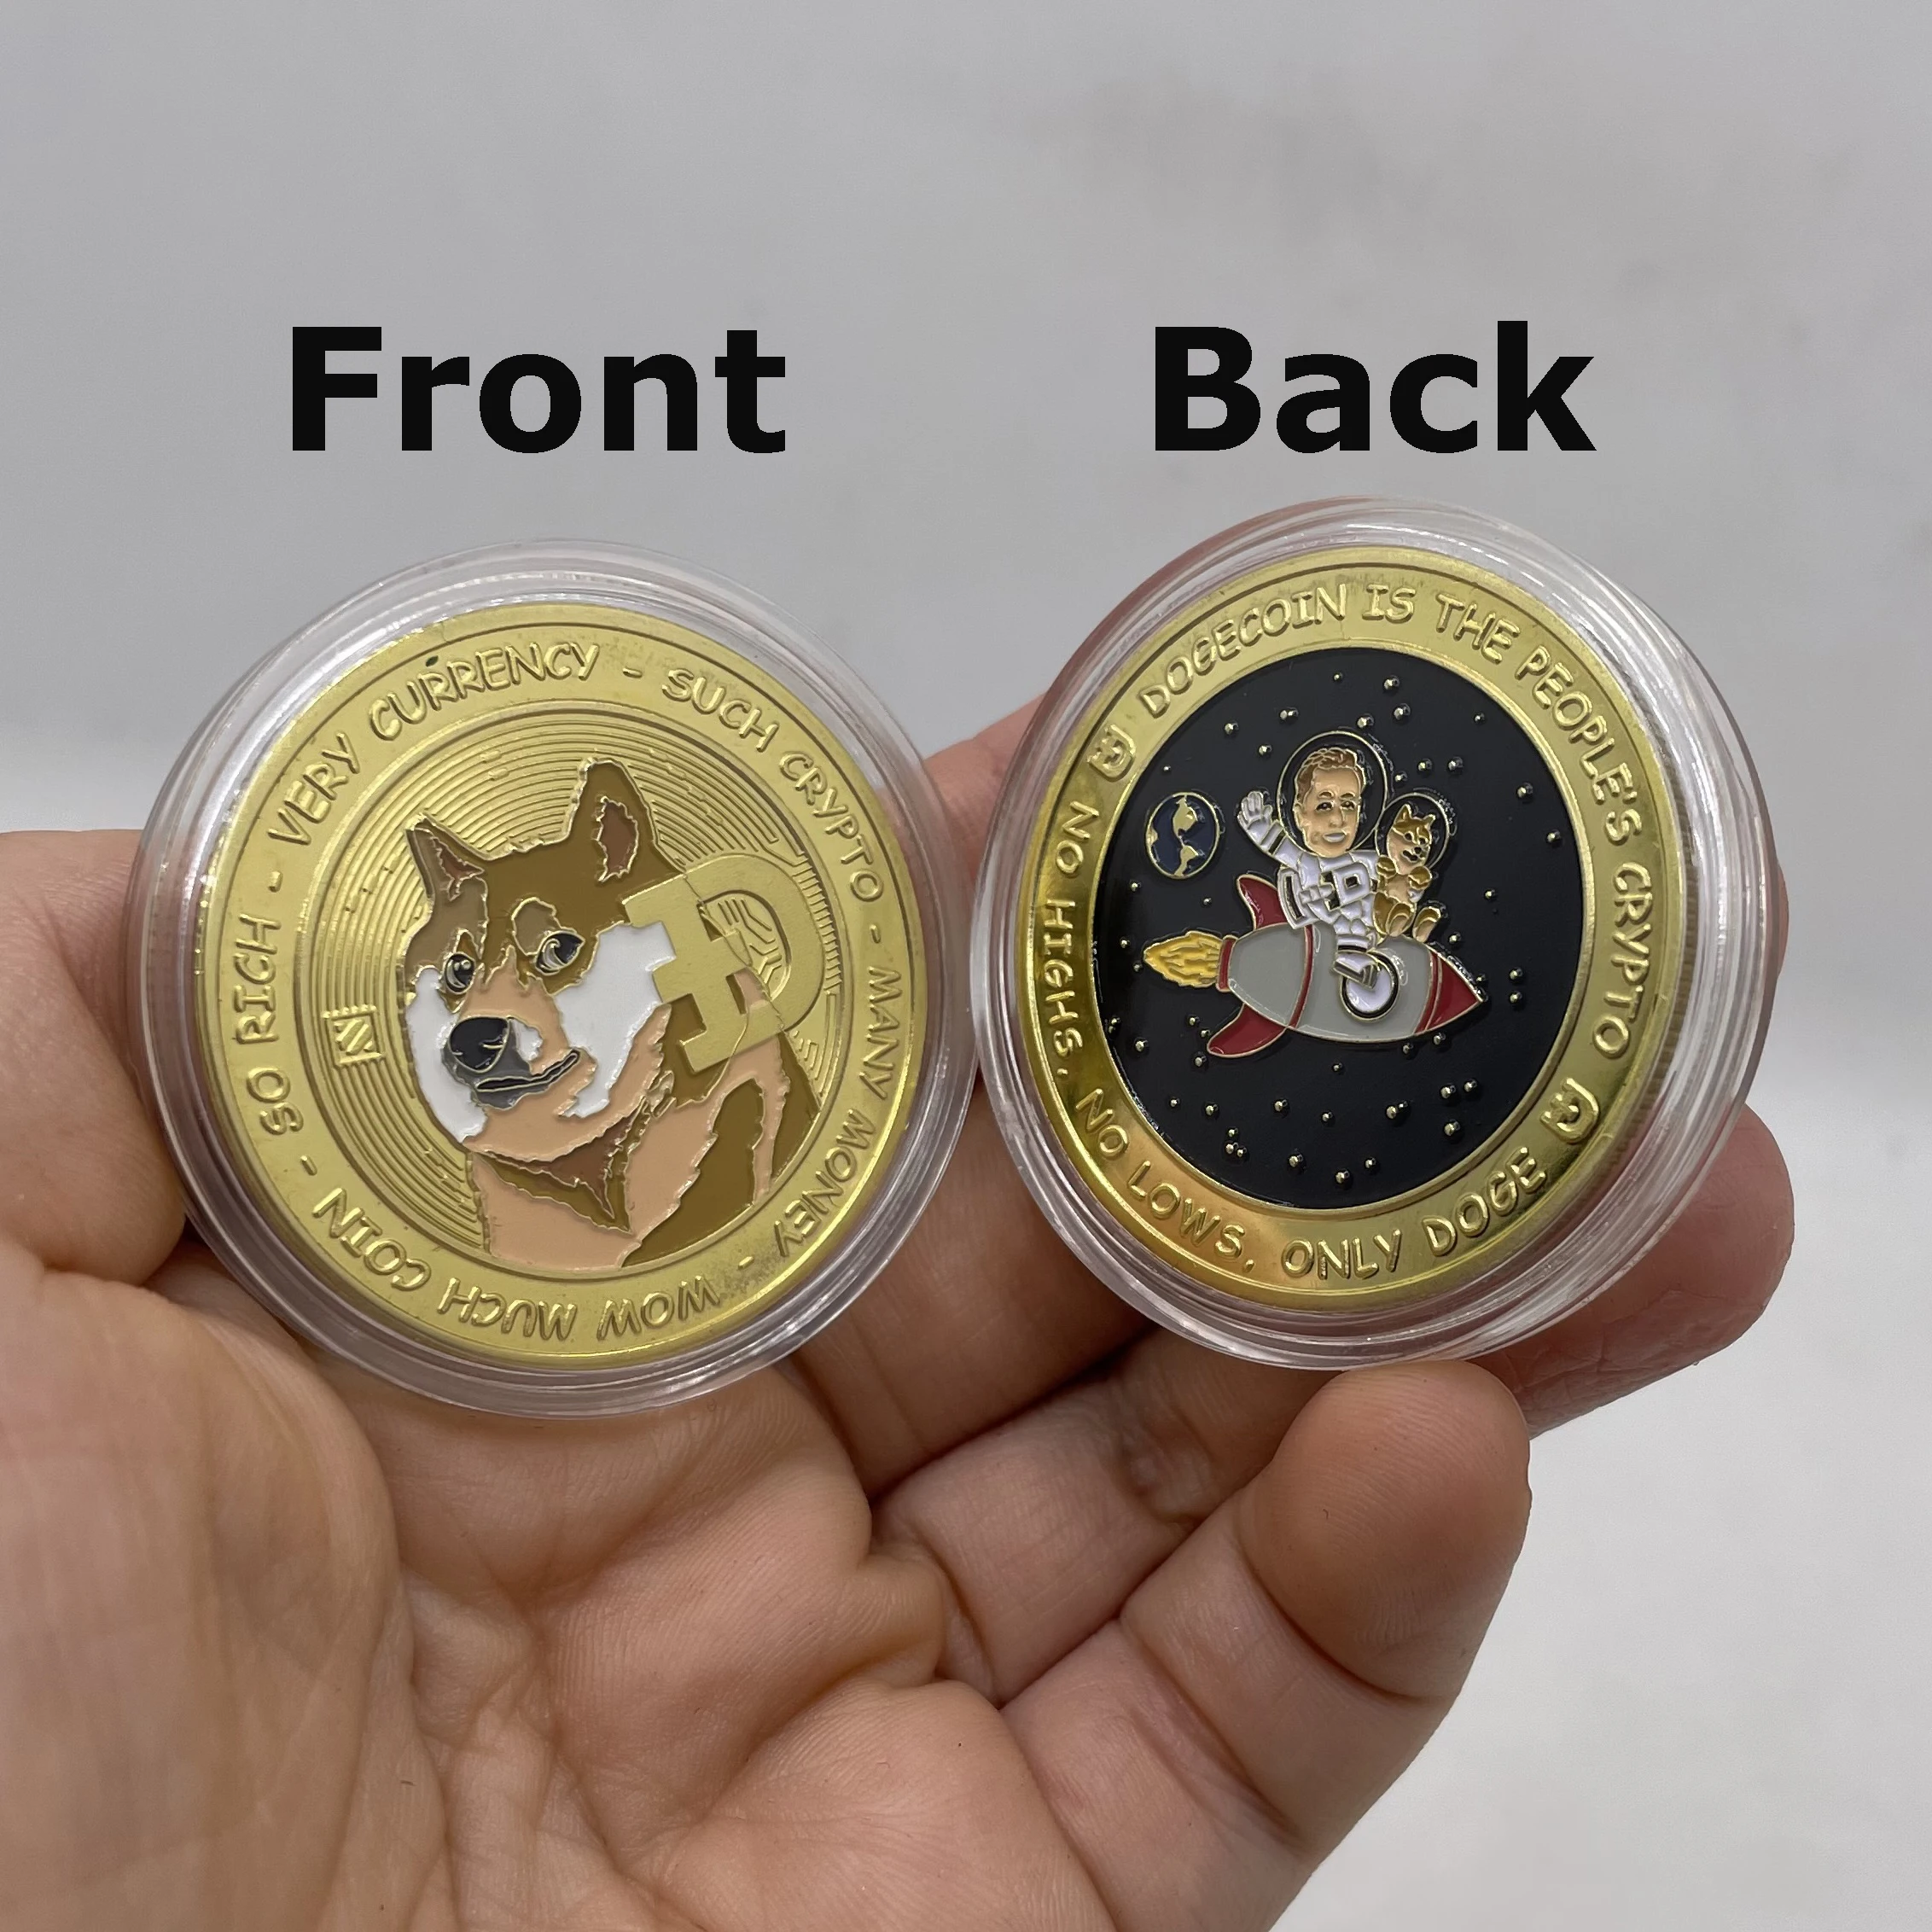 Doge to The Moon Theme Gold Plated Doge Coins Limited Edition Collectible Coin with Protective Case 5PCS Dogecoin Coins 